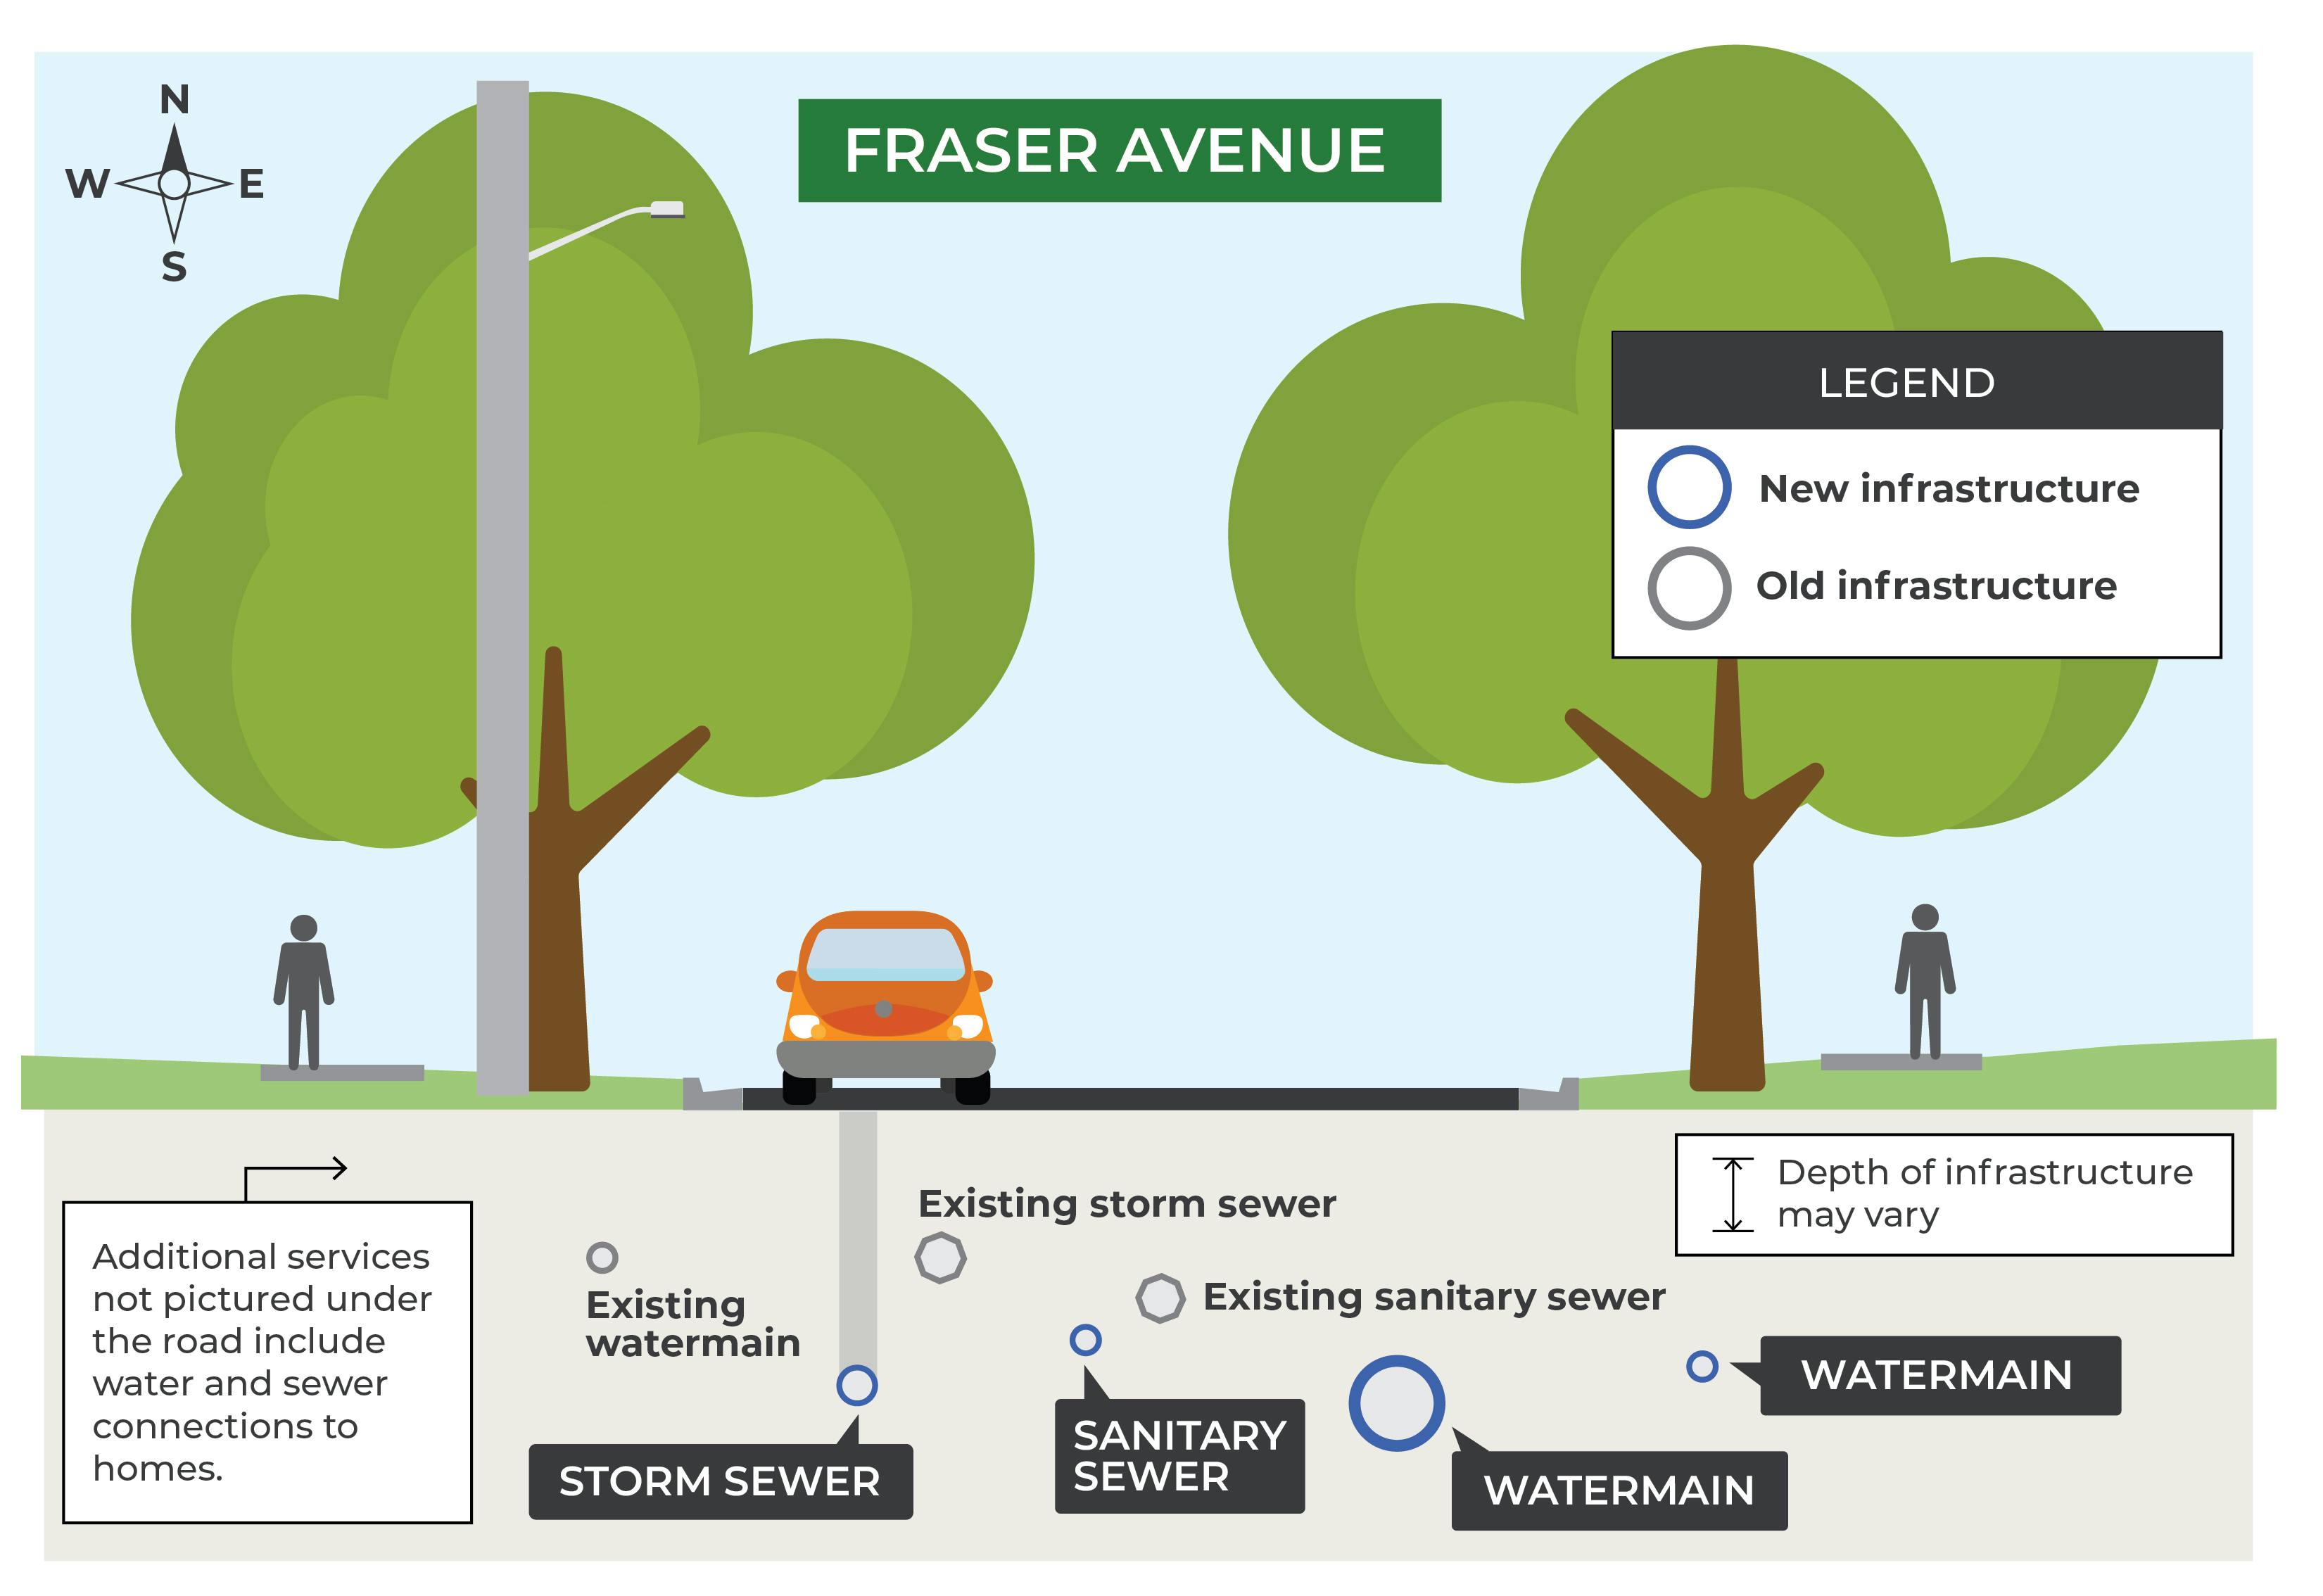 An illustration of the underground work planned on Fraser Avenue